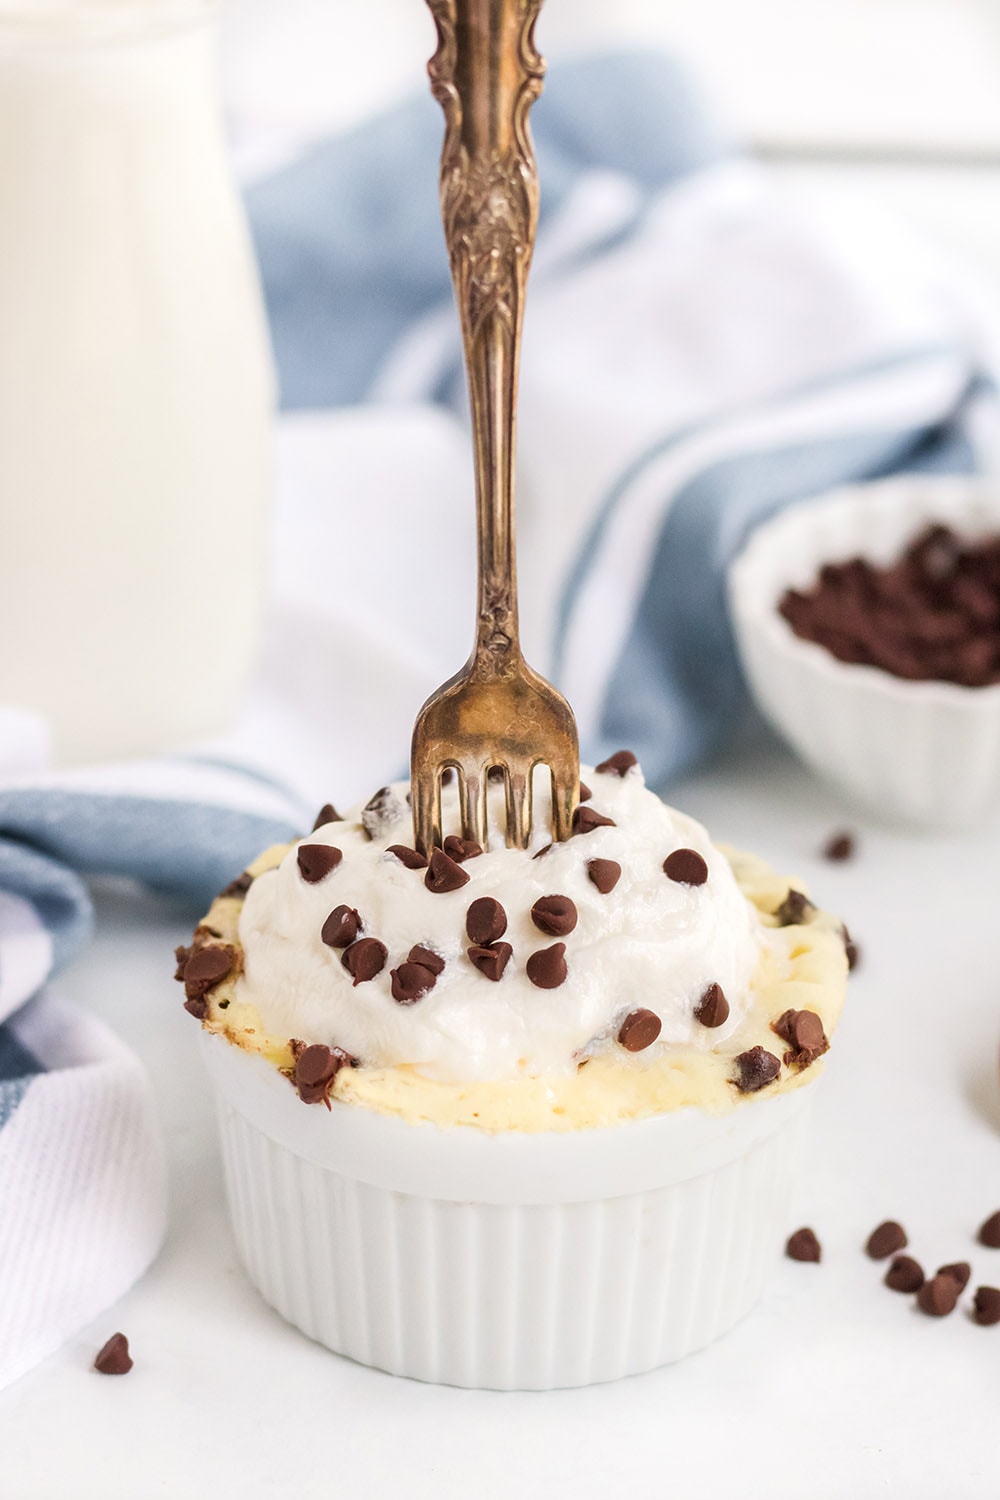 Fork in a chocolate chip mug cake surrounded by chocolate chips, blue napkin, and jar of milk.